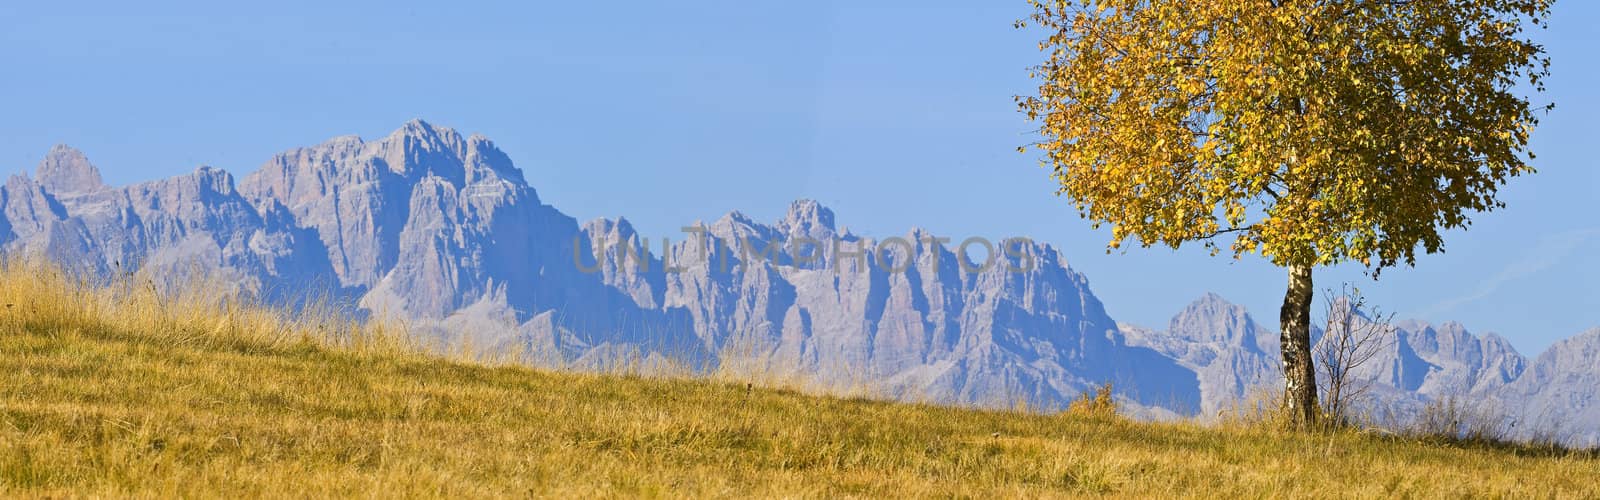 Mountain panoramic and solitary tree  by AlessandroZocc